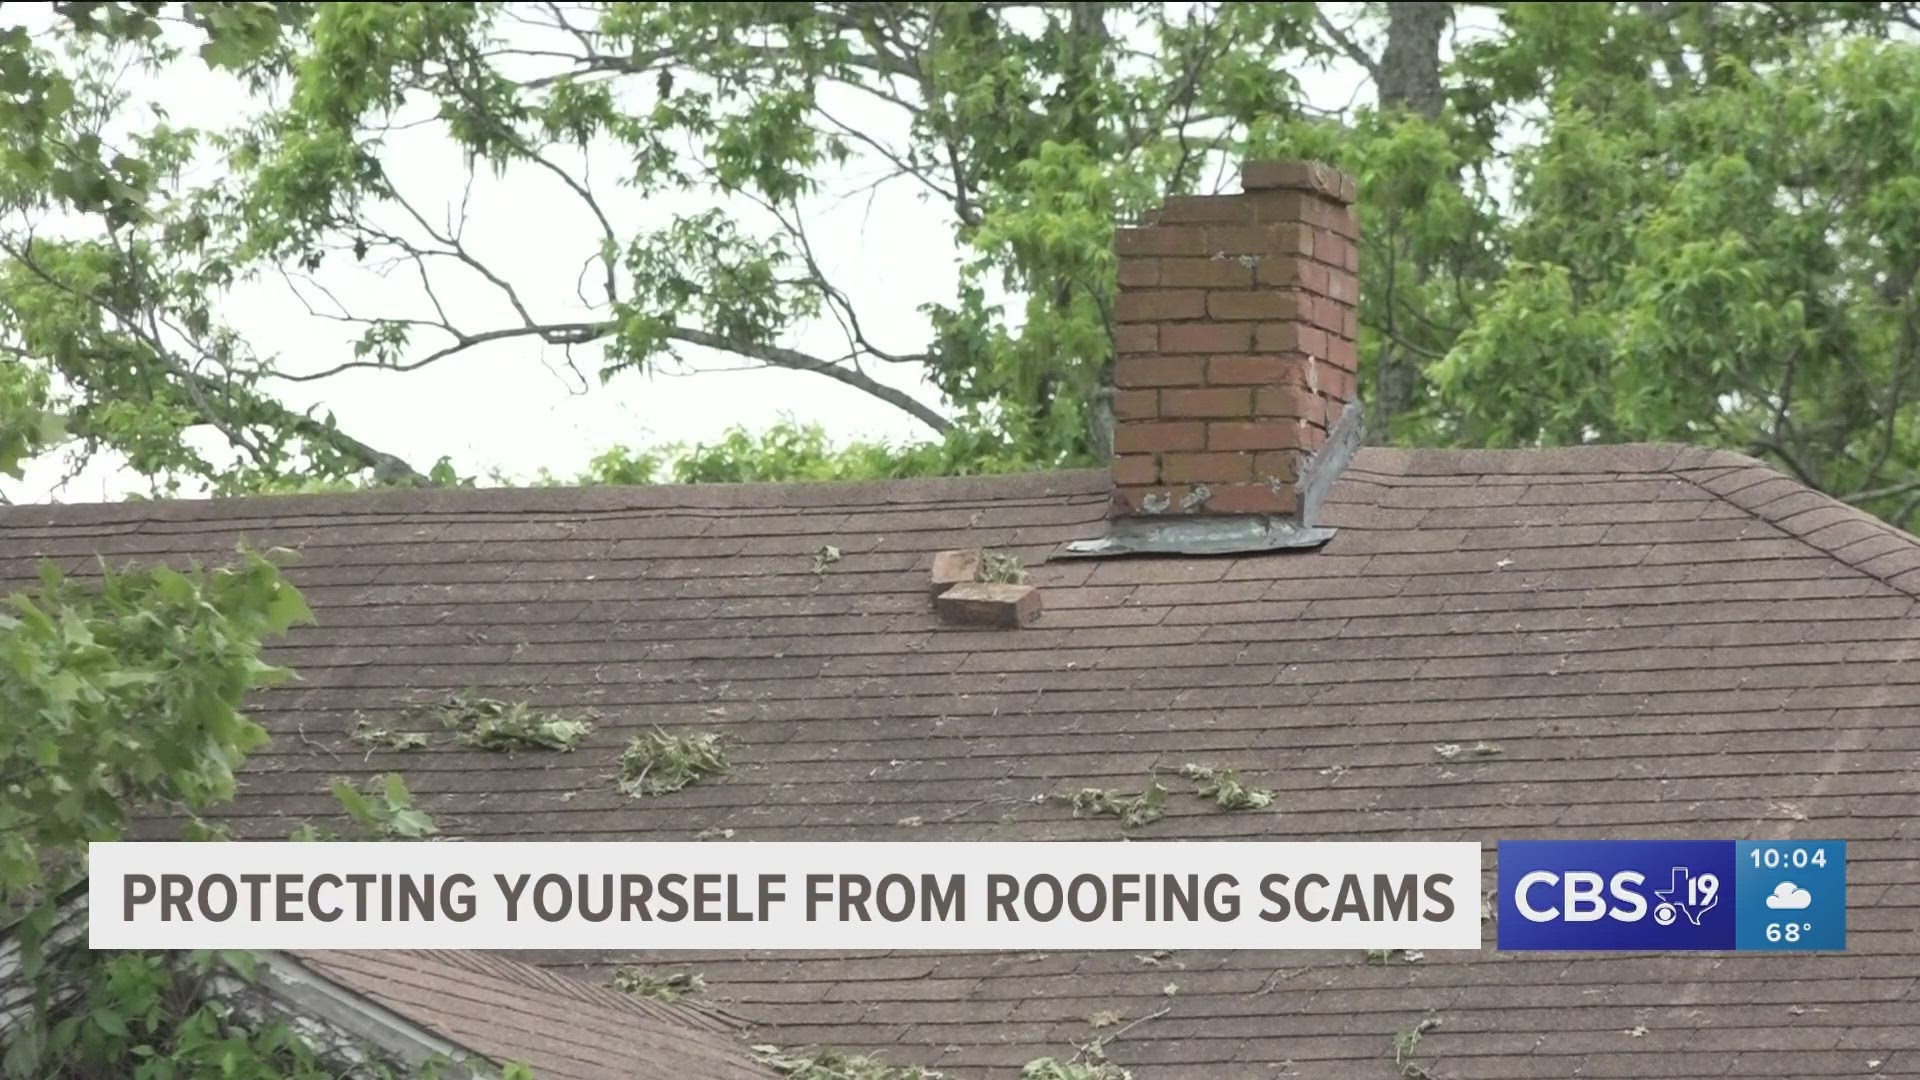 The local Better Business Bureau advises to be on the lookout for people coming into town to scam you and run away with your money.